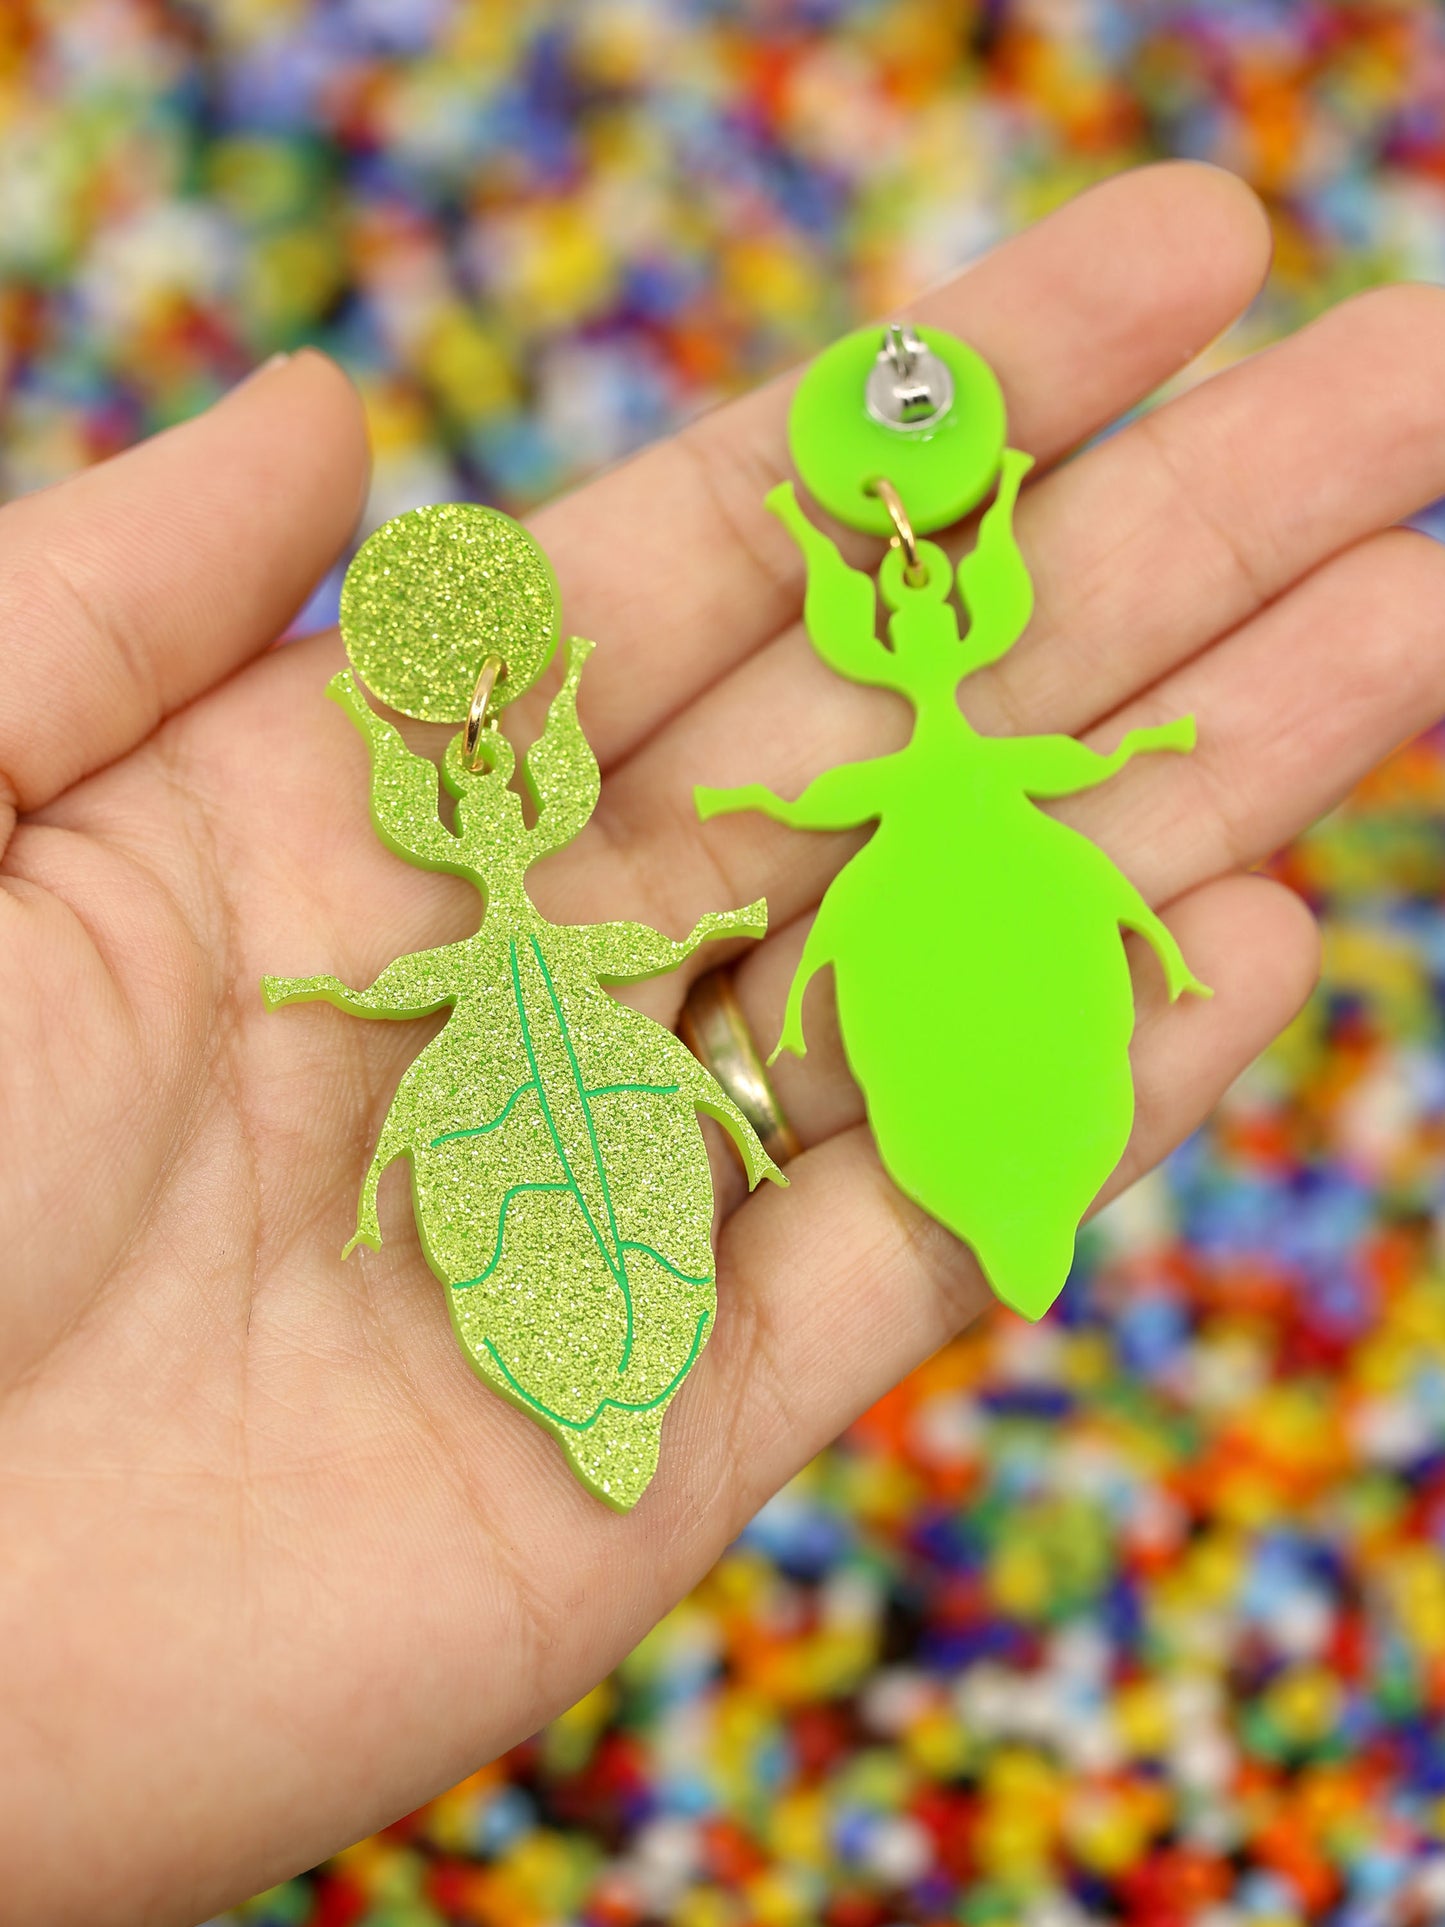 Monteith's Leaf Insect Dangles